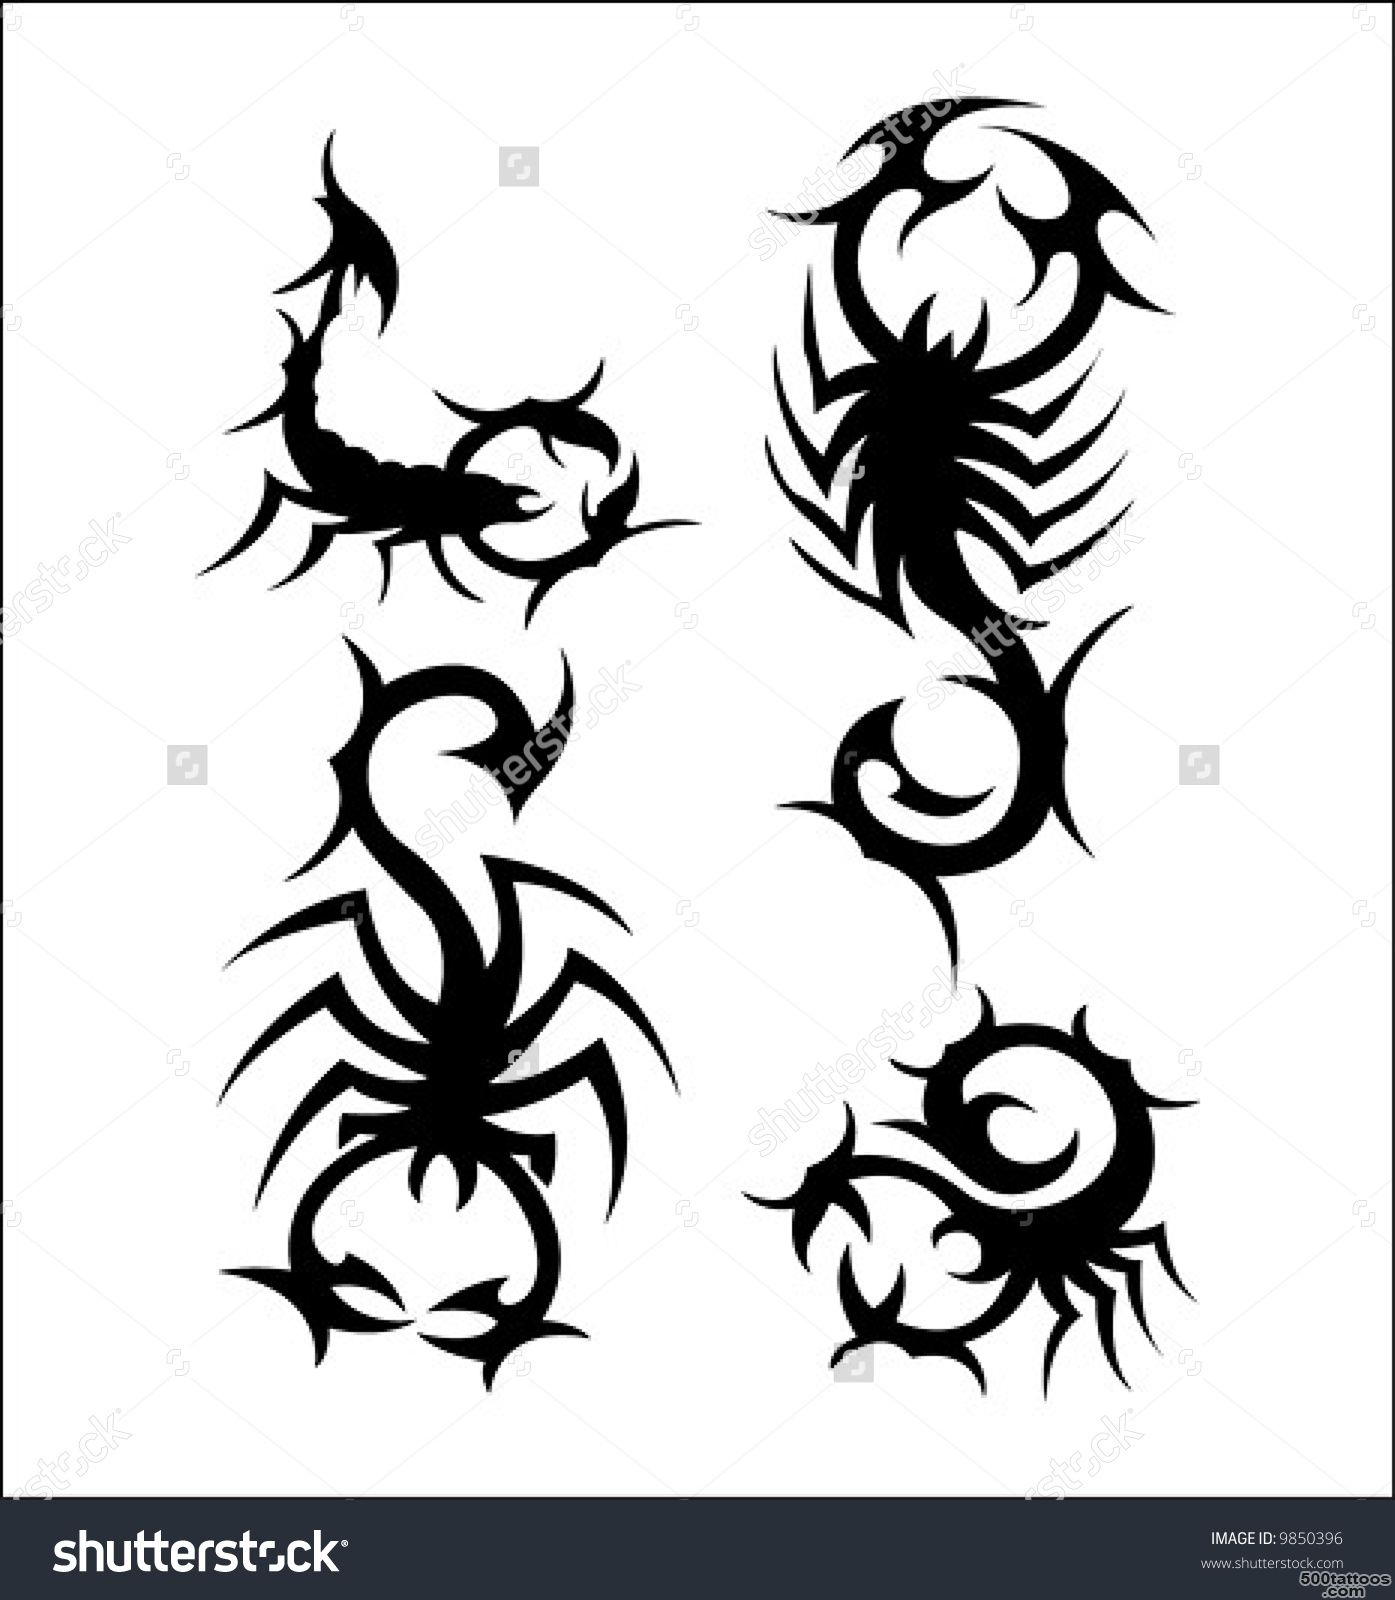 Scorpion Tattoo Stock Photos, Images, amp Pictures  Shutterstock_15